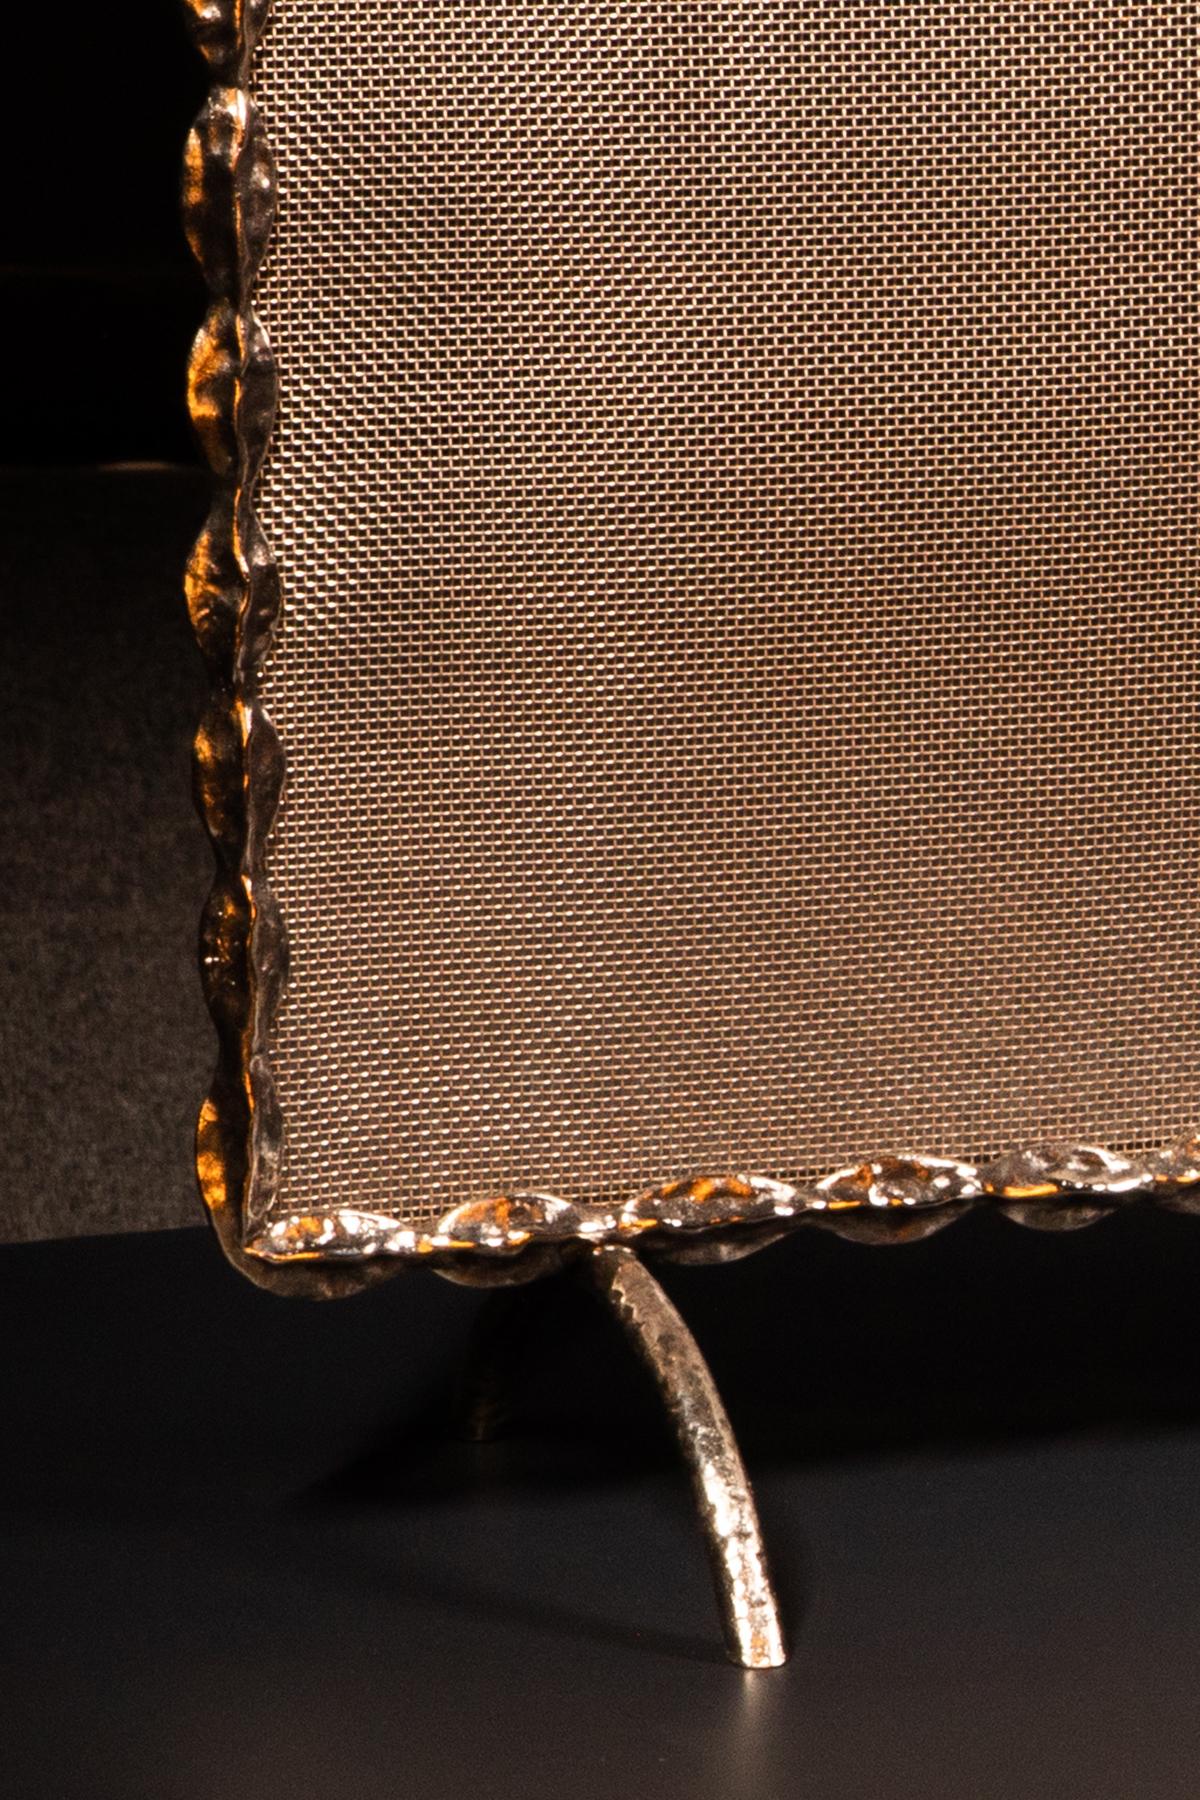 Rectangular silvered bronze frame with a repeating drop-like form, enclosing a steel mesh screen.

   